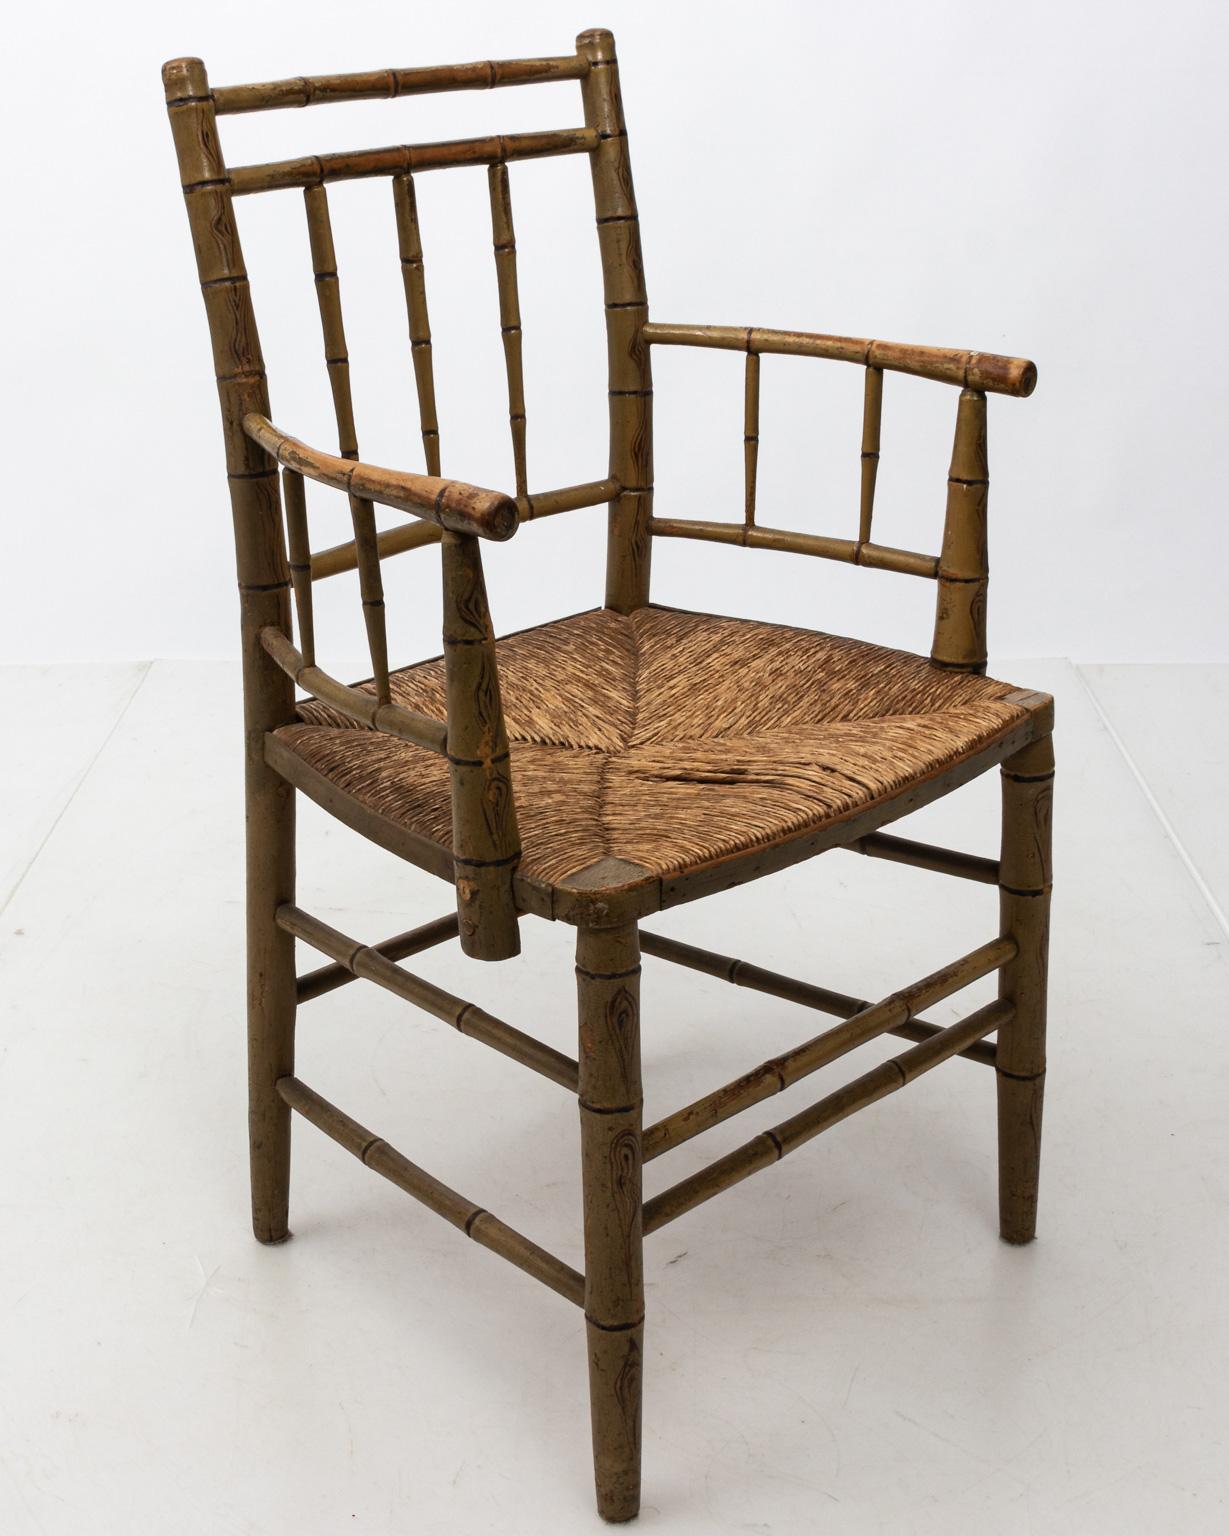 Aux bamboo painted armchair with woven rush seat and square, slat back. Please note of wear consistent with age including paint and finish loss.